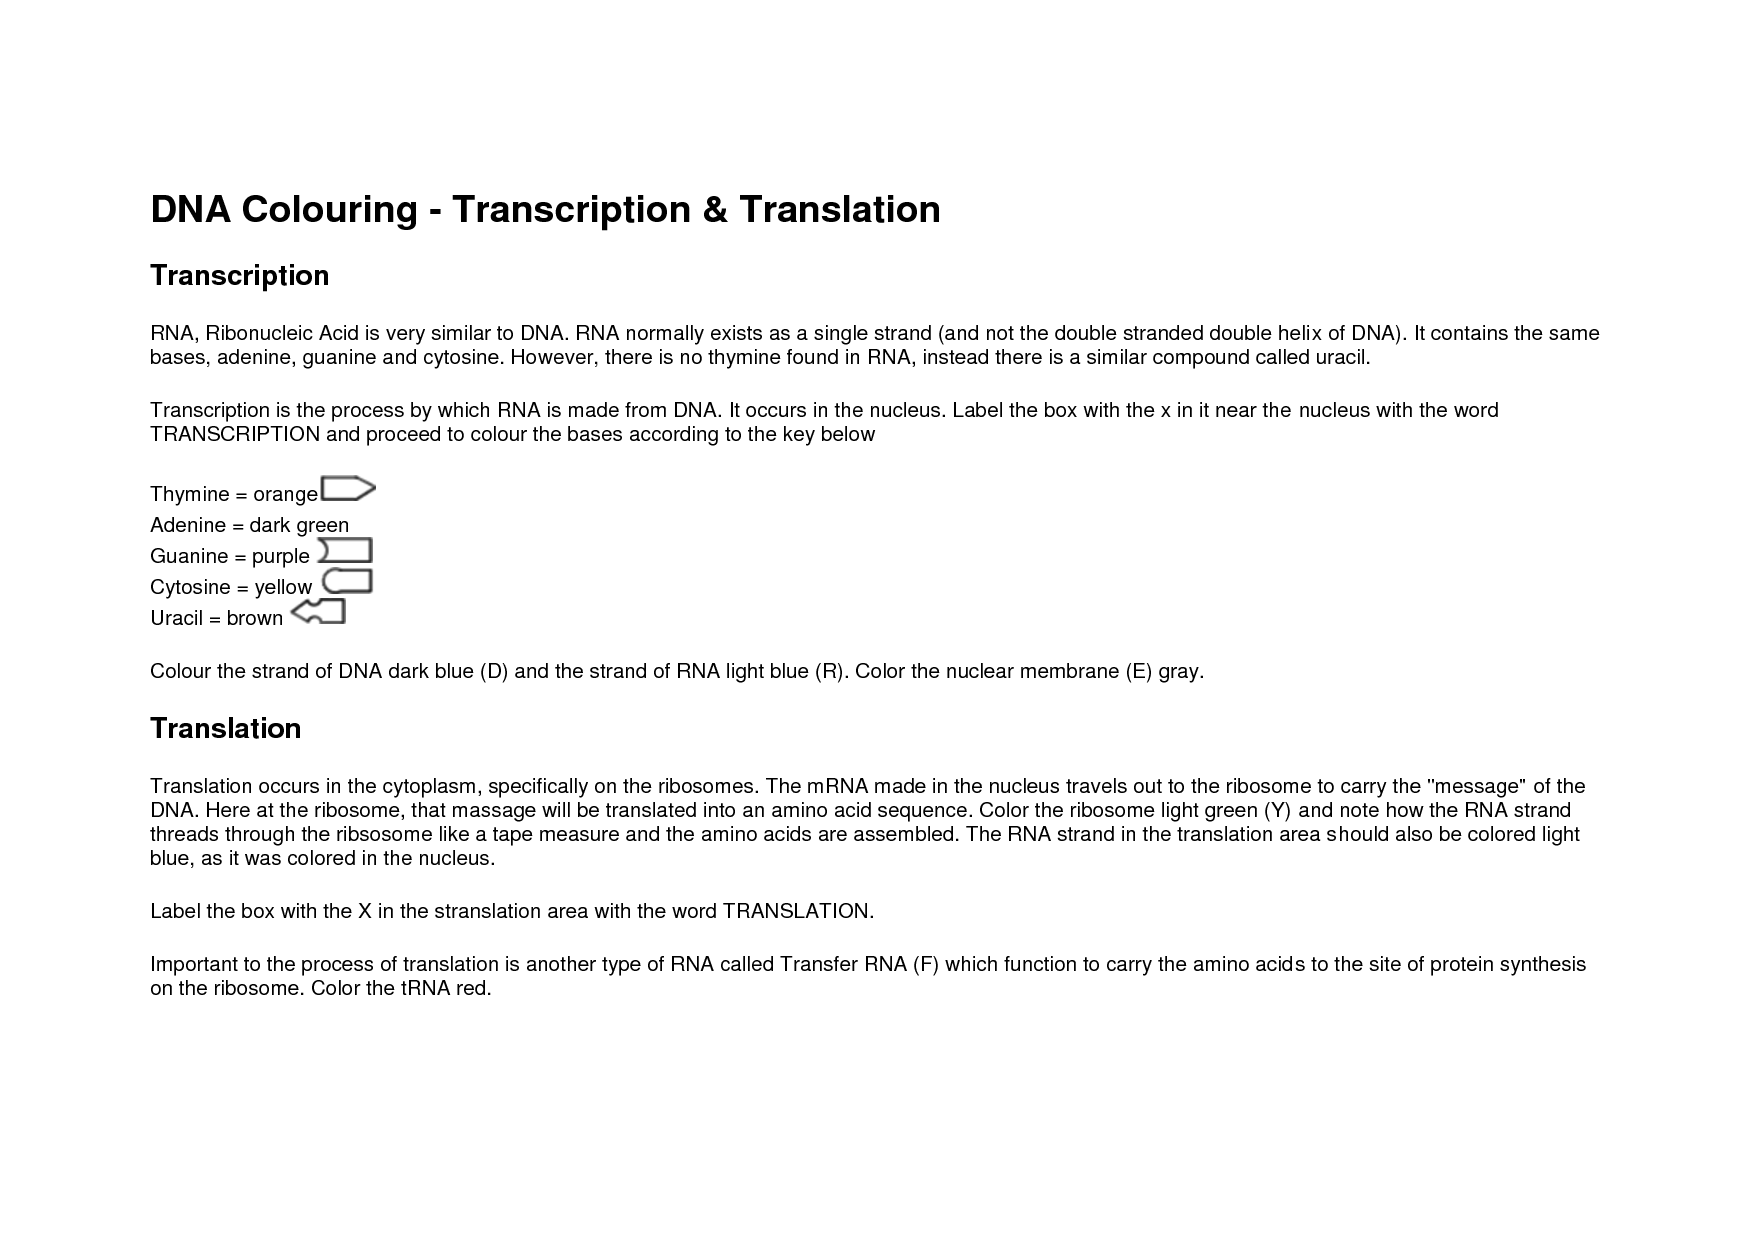 DNA Coloring Transcription and Translation Answer Key Image